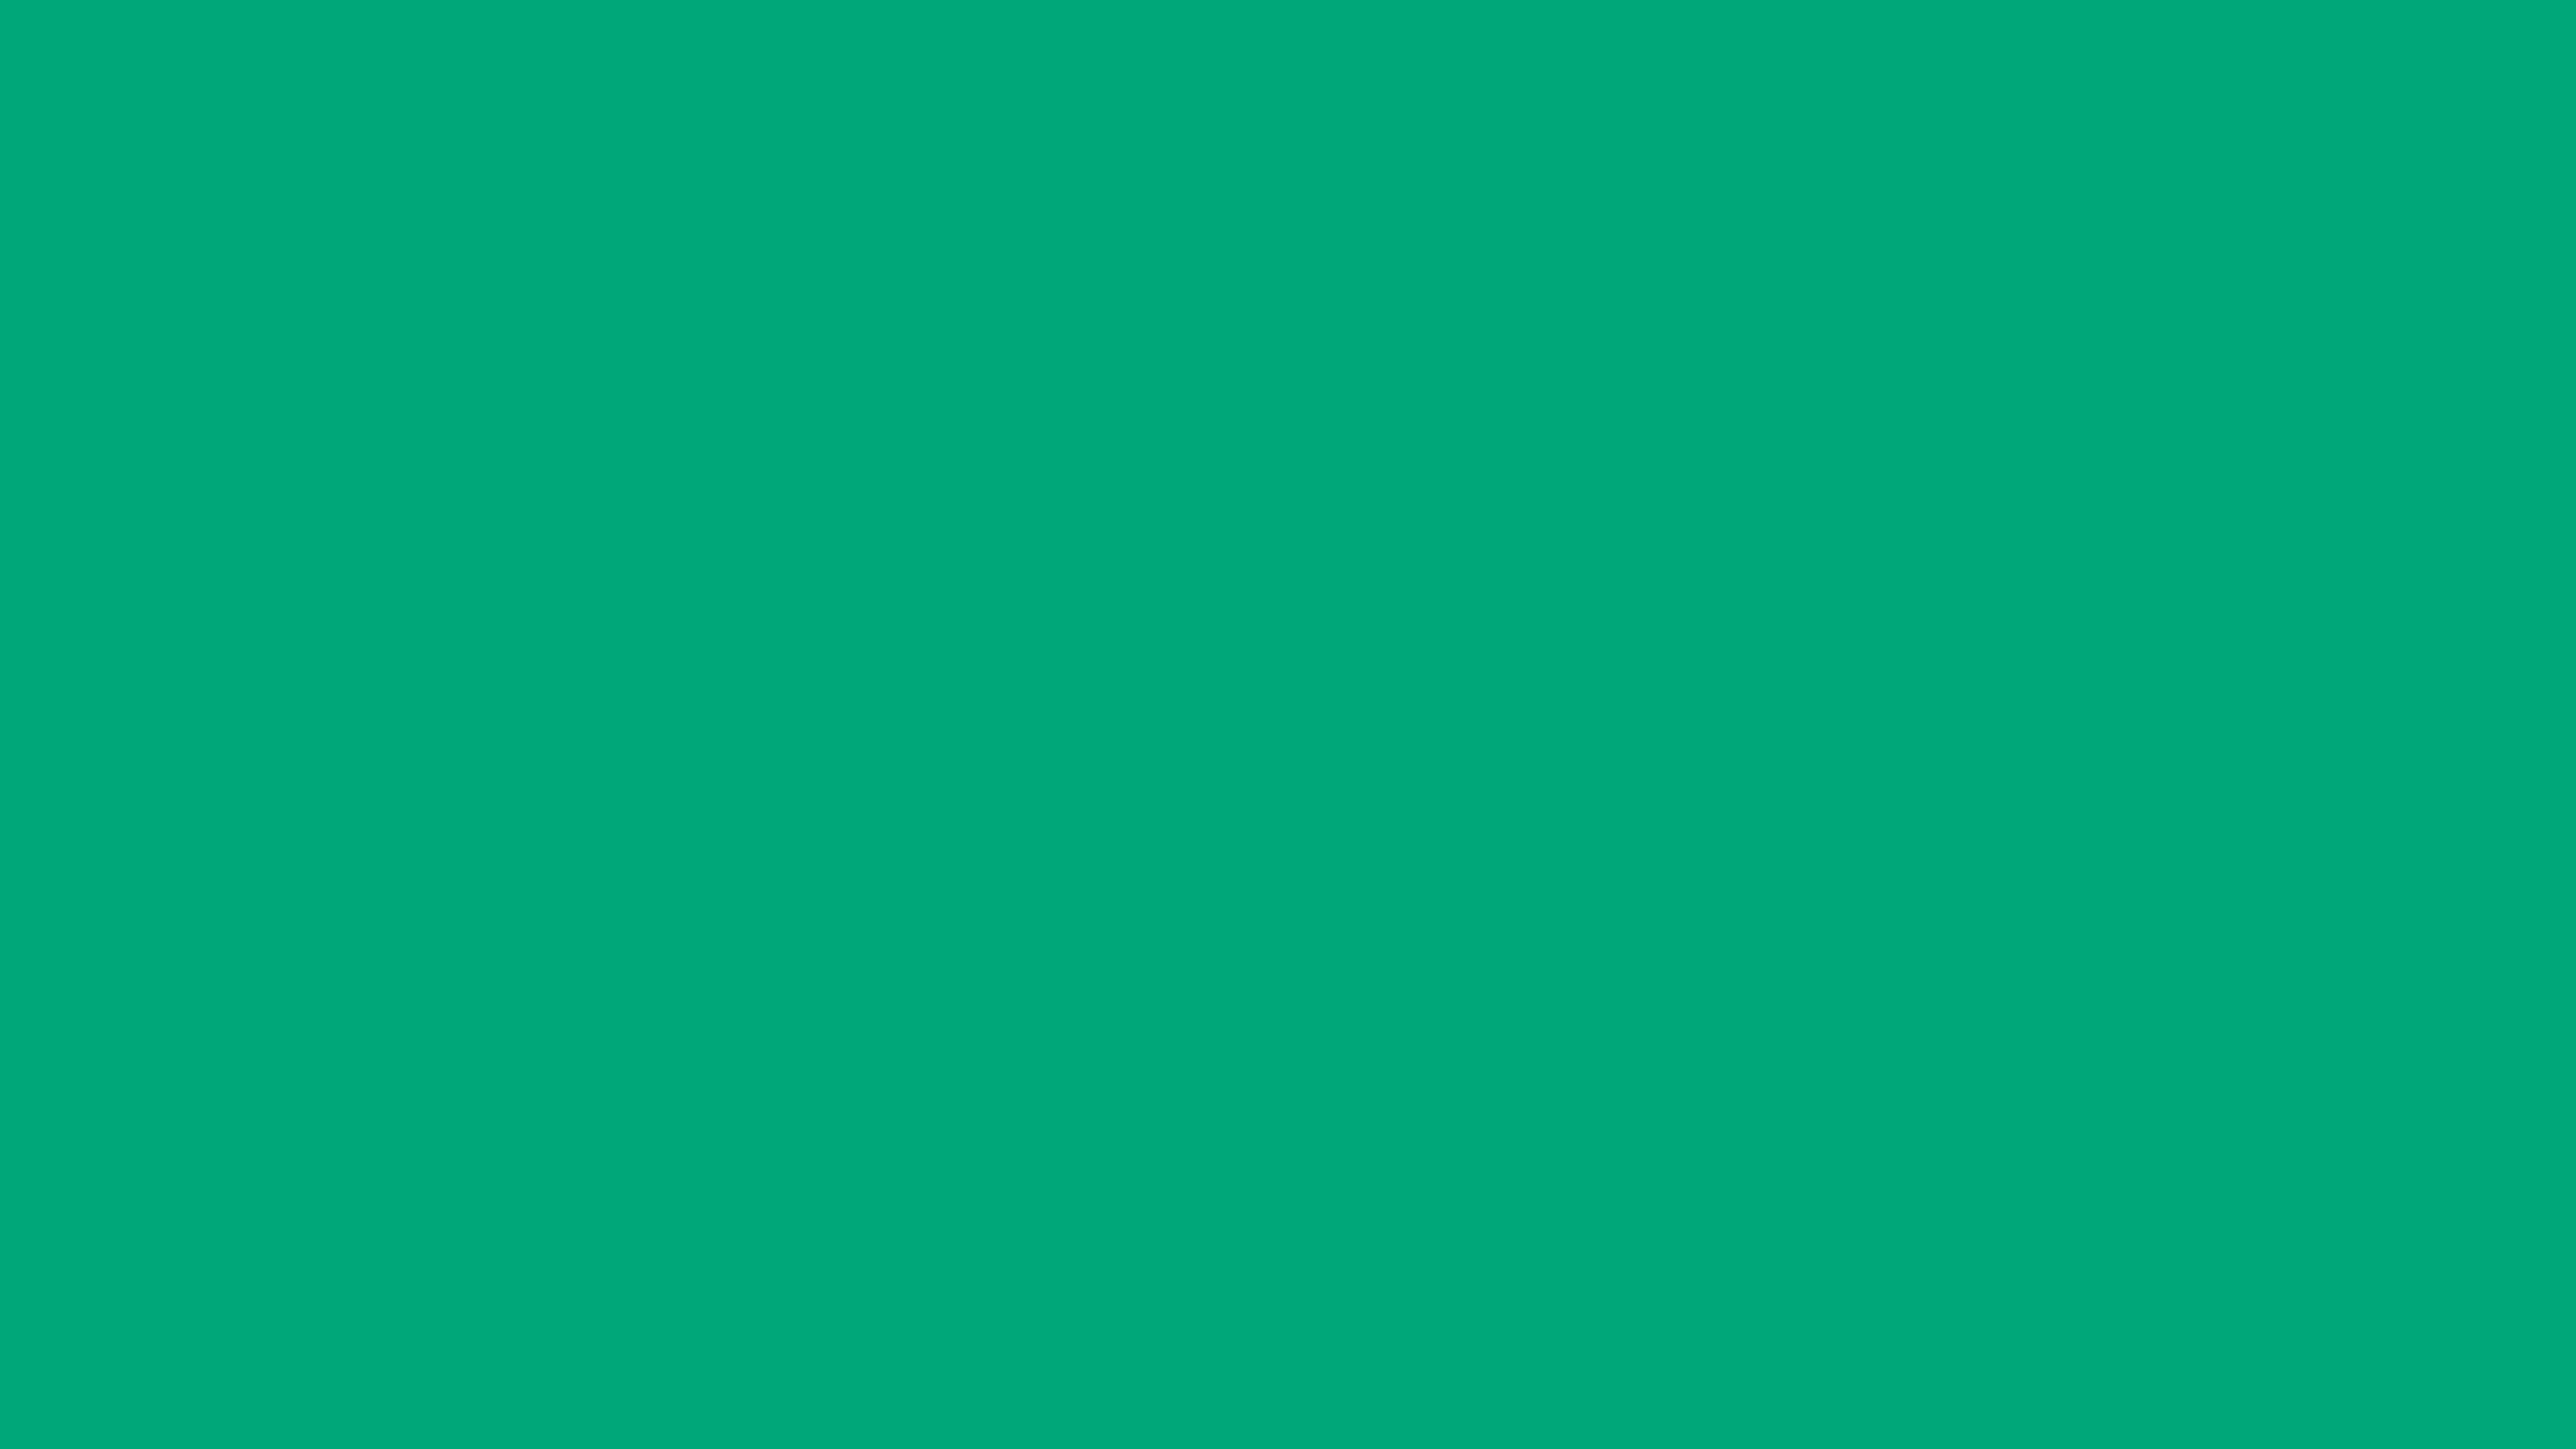 5120x2880 Green Munsell Solid Color Background